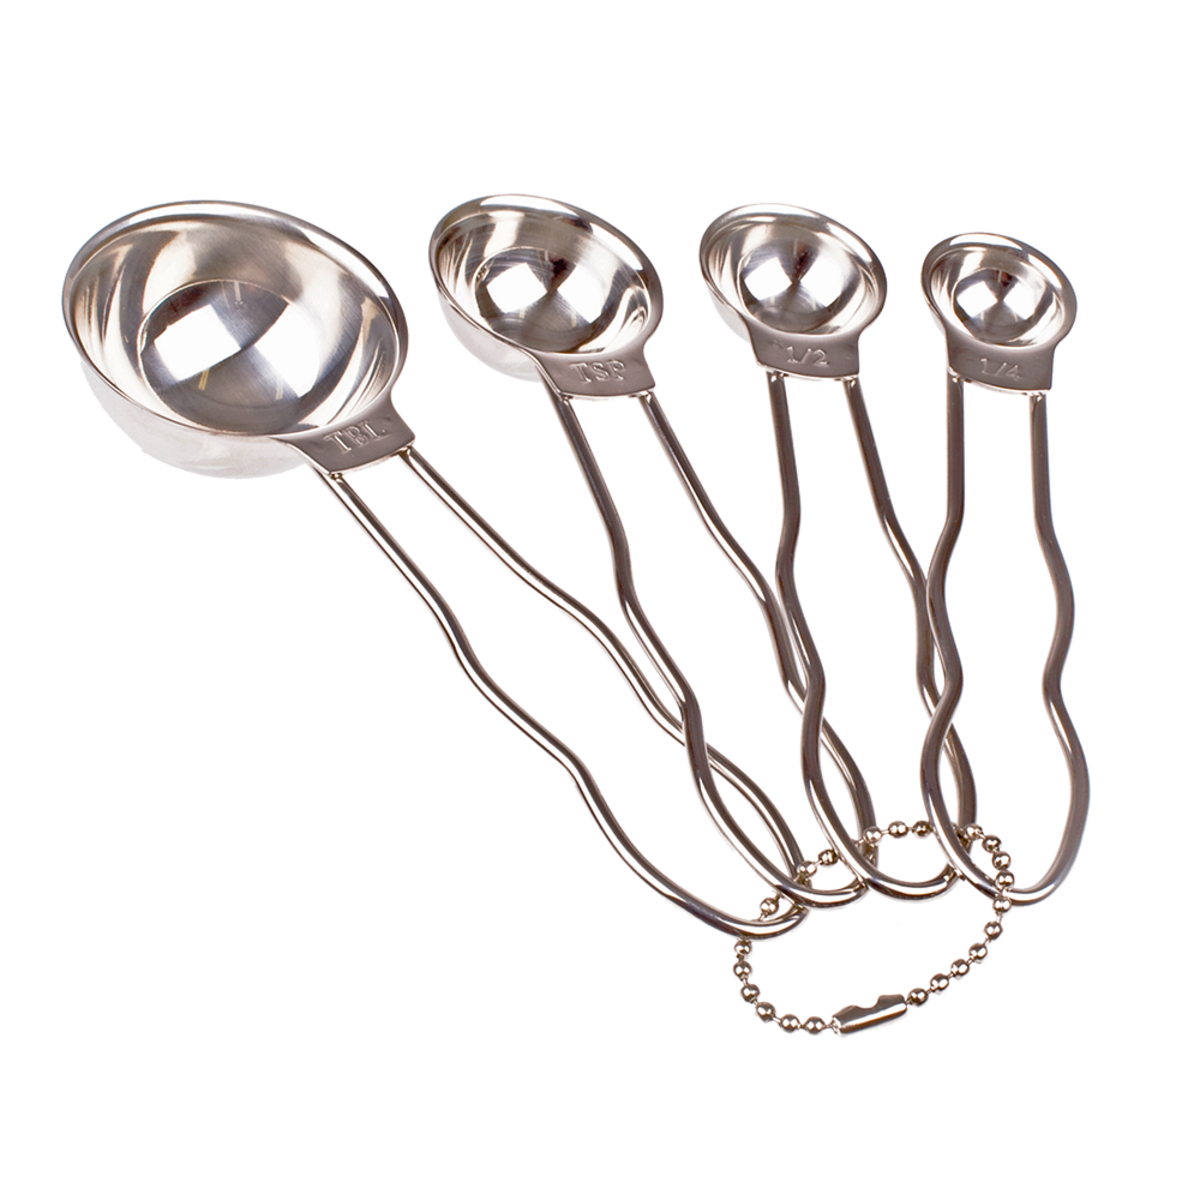 Appetito Stainless Steel Measuring Spoons